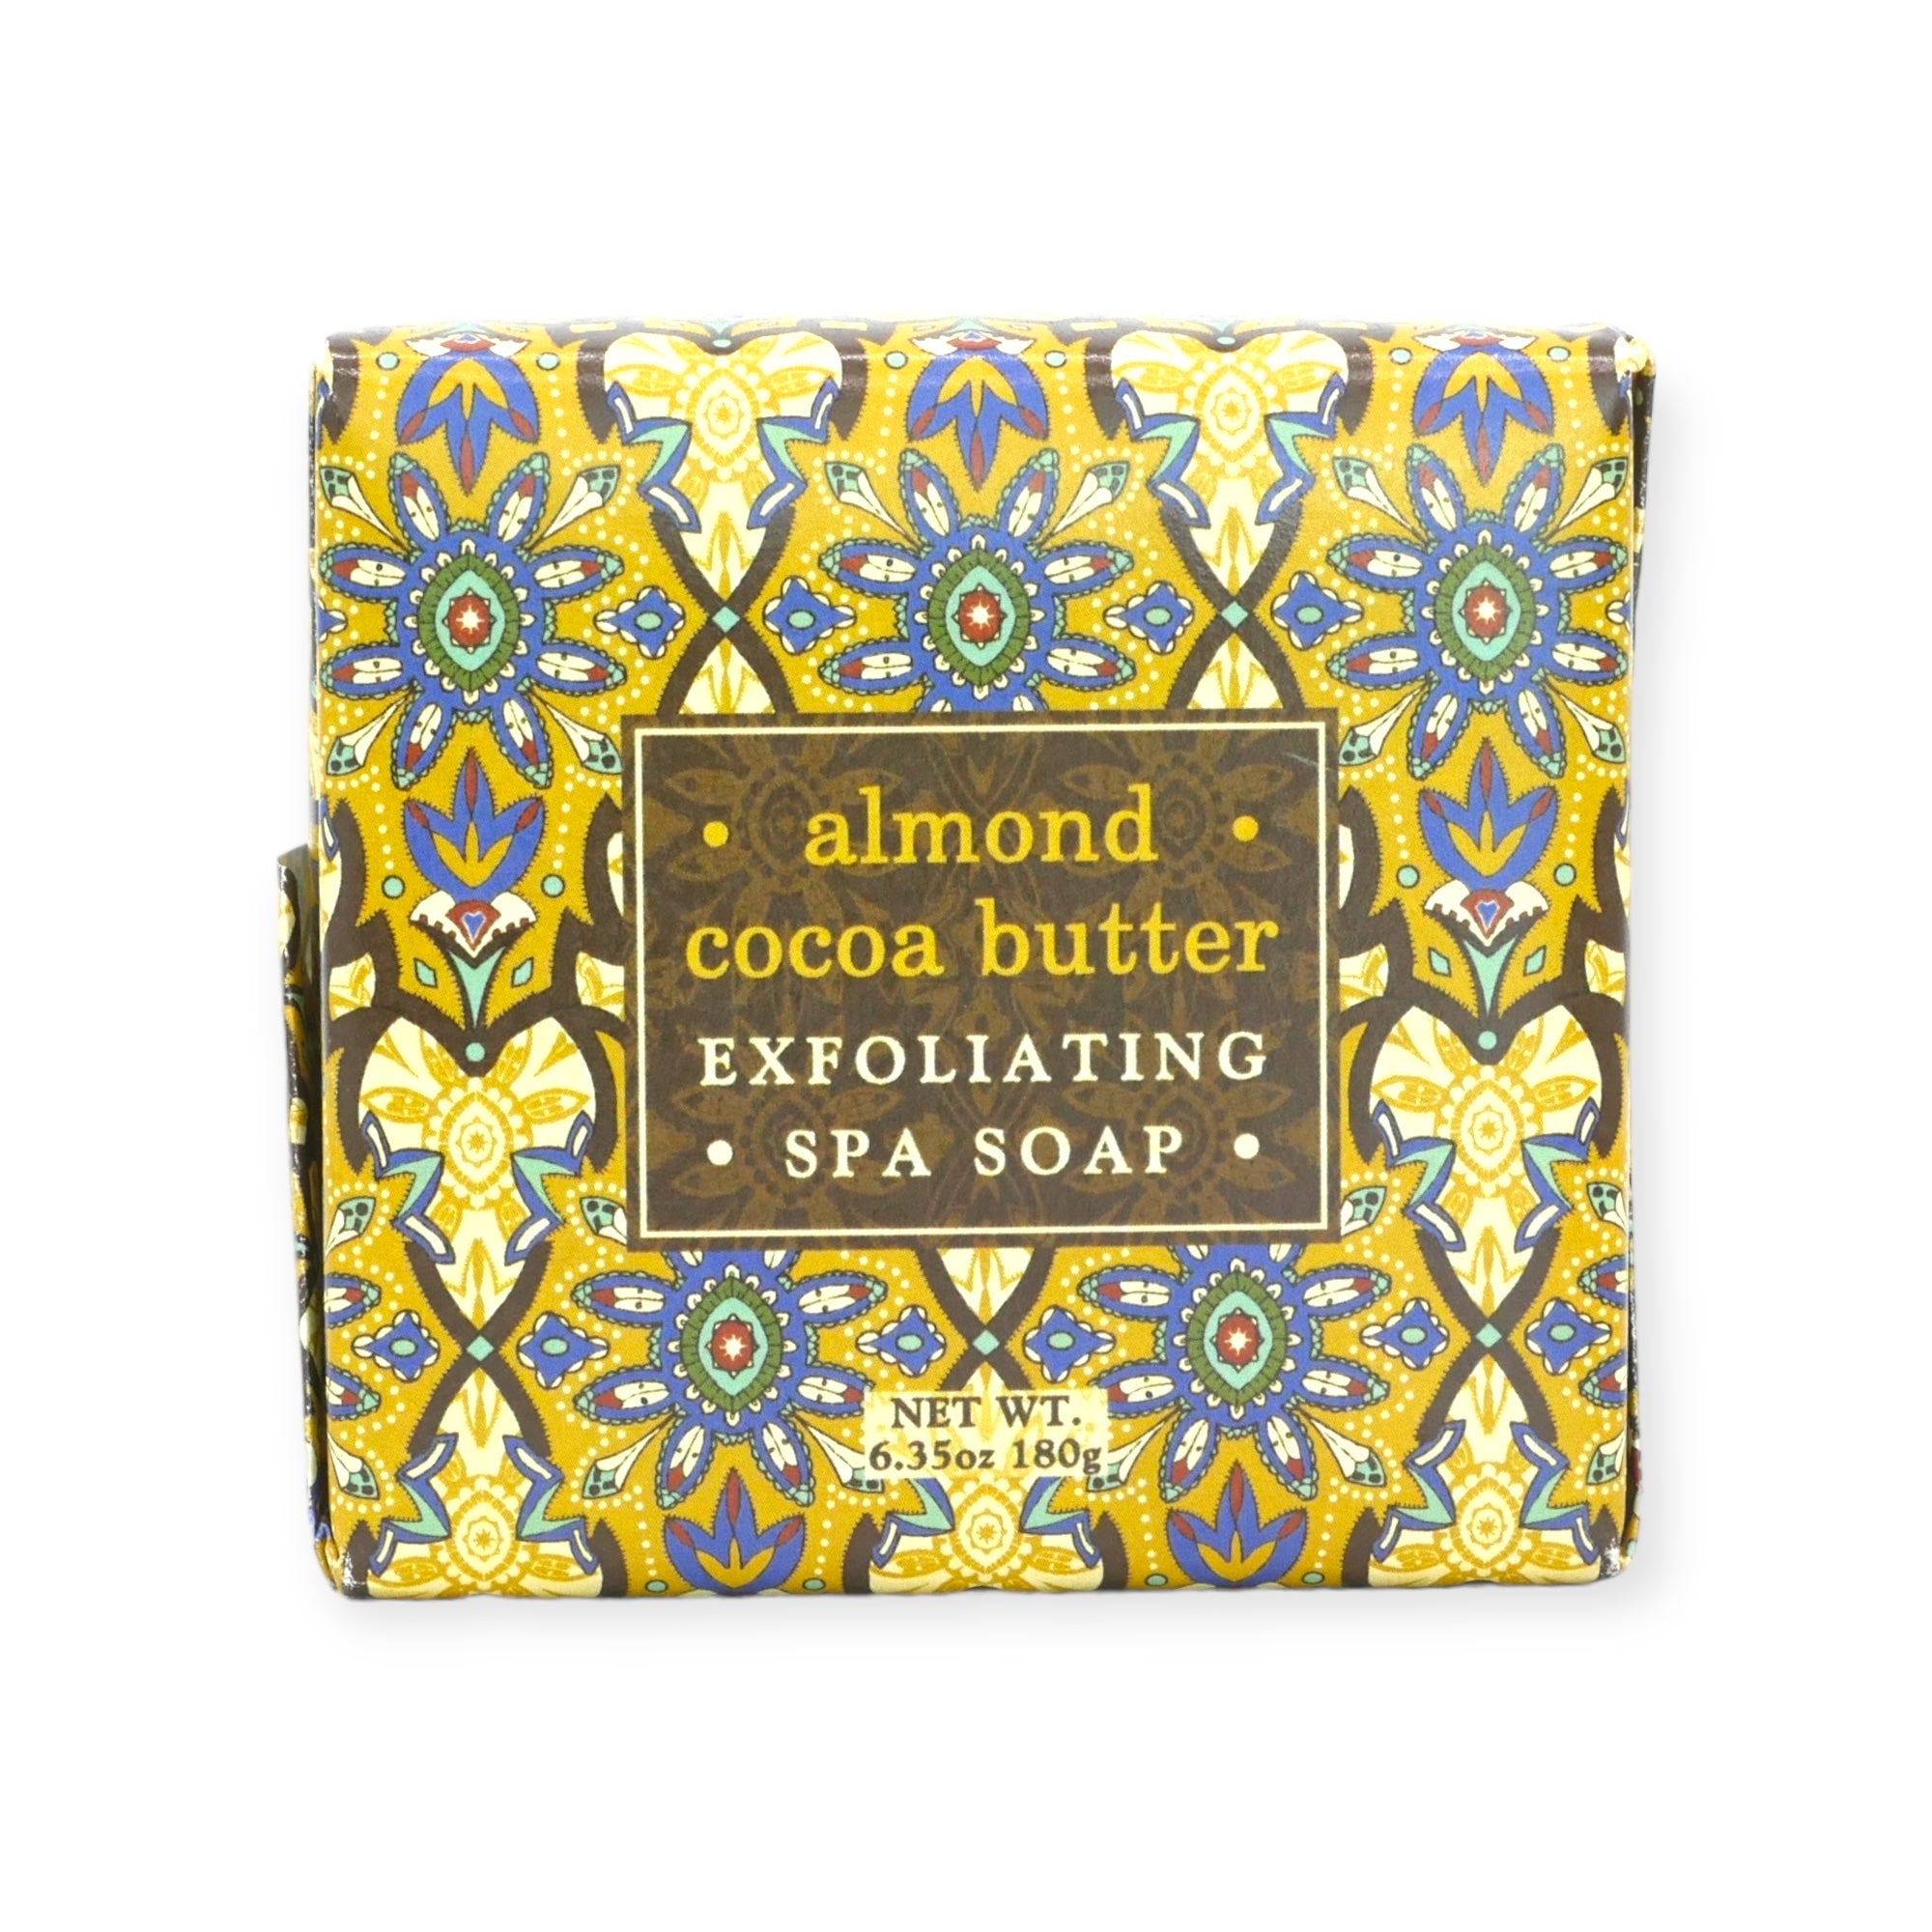 Almond & Cocoa Butter Exfoliating Spa Soap by Greenwich Bay Trading Co.